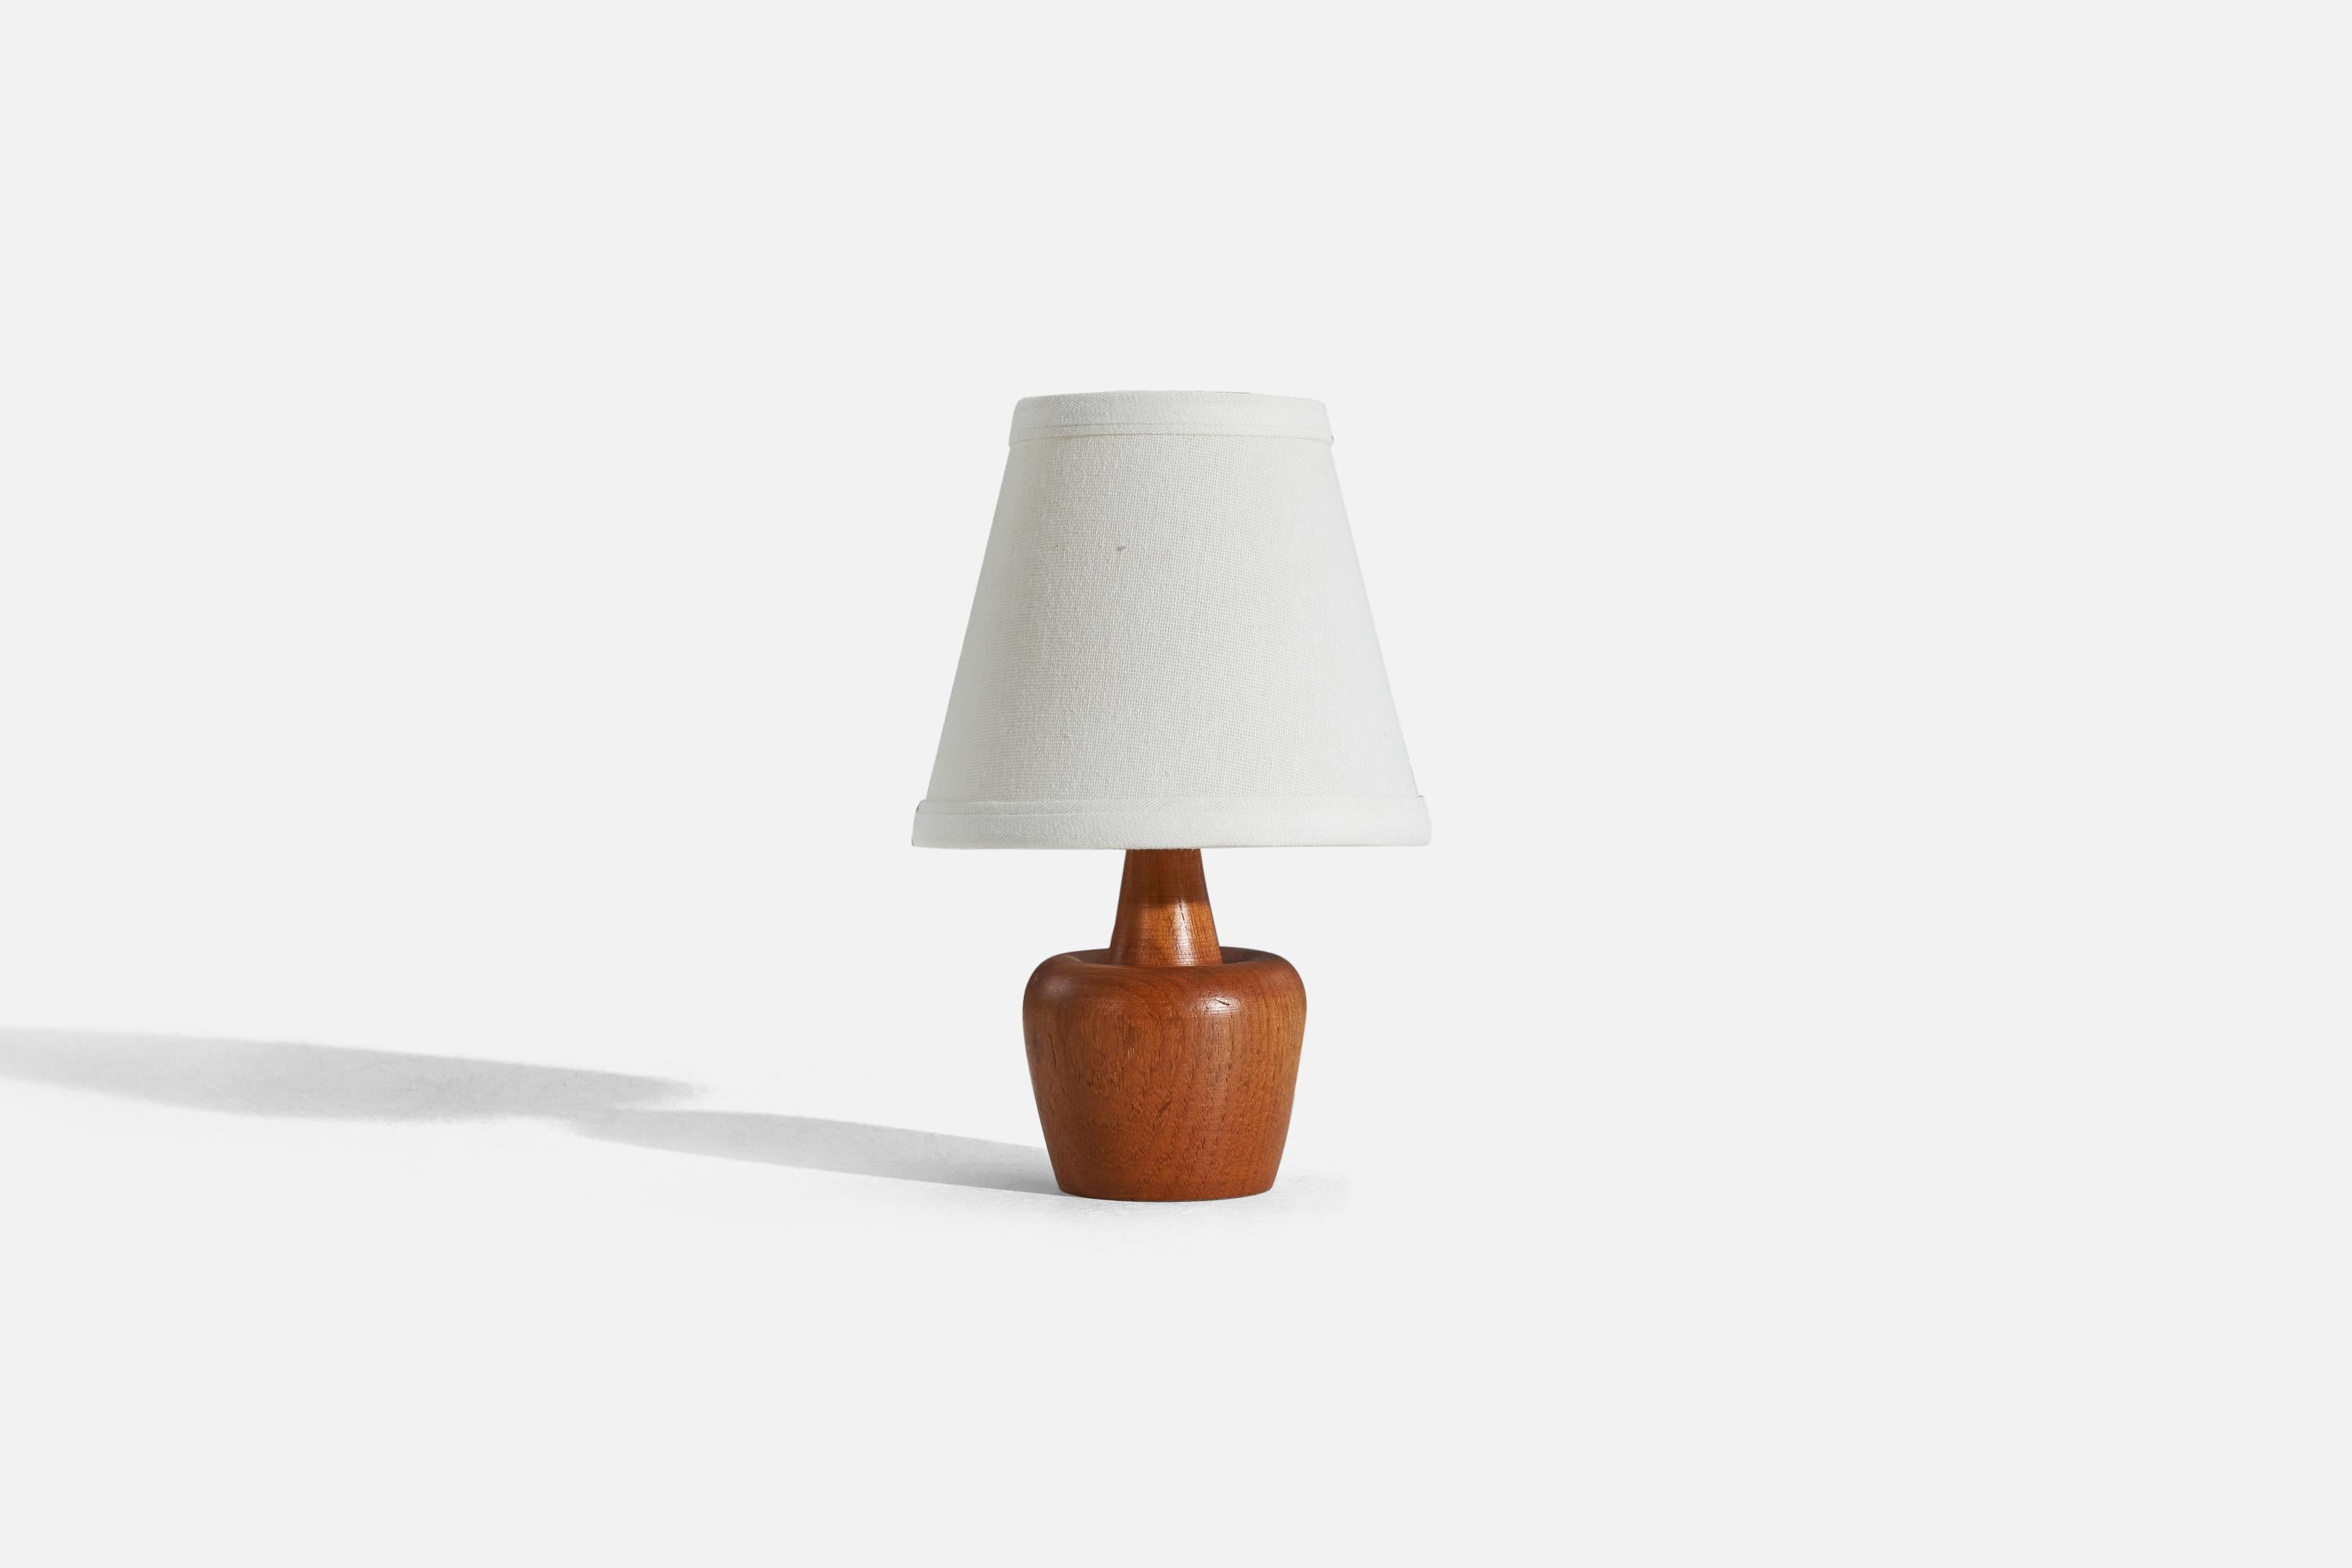 A teak table lamp designed and produced in Sweden, c. 1950s. 

Sold without lampshade. 
Dimensions of Lamp (inches) : 5.8125 x 2.9375 x 2.9375 (H x W x D)
Dimensions of Shade (inches) : 3 x 5 x 4.5 (T x B x H)
Dimension of Lamp with Shade